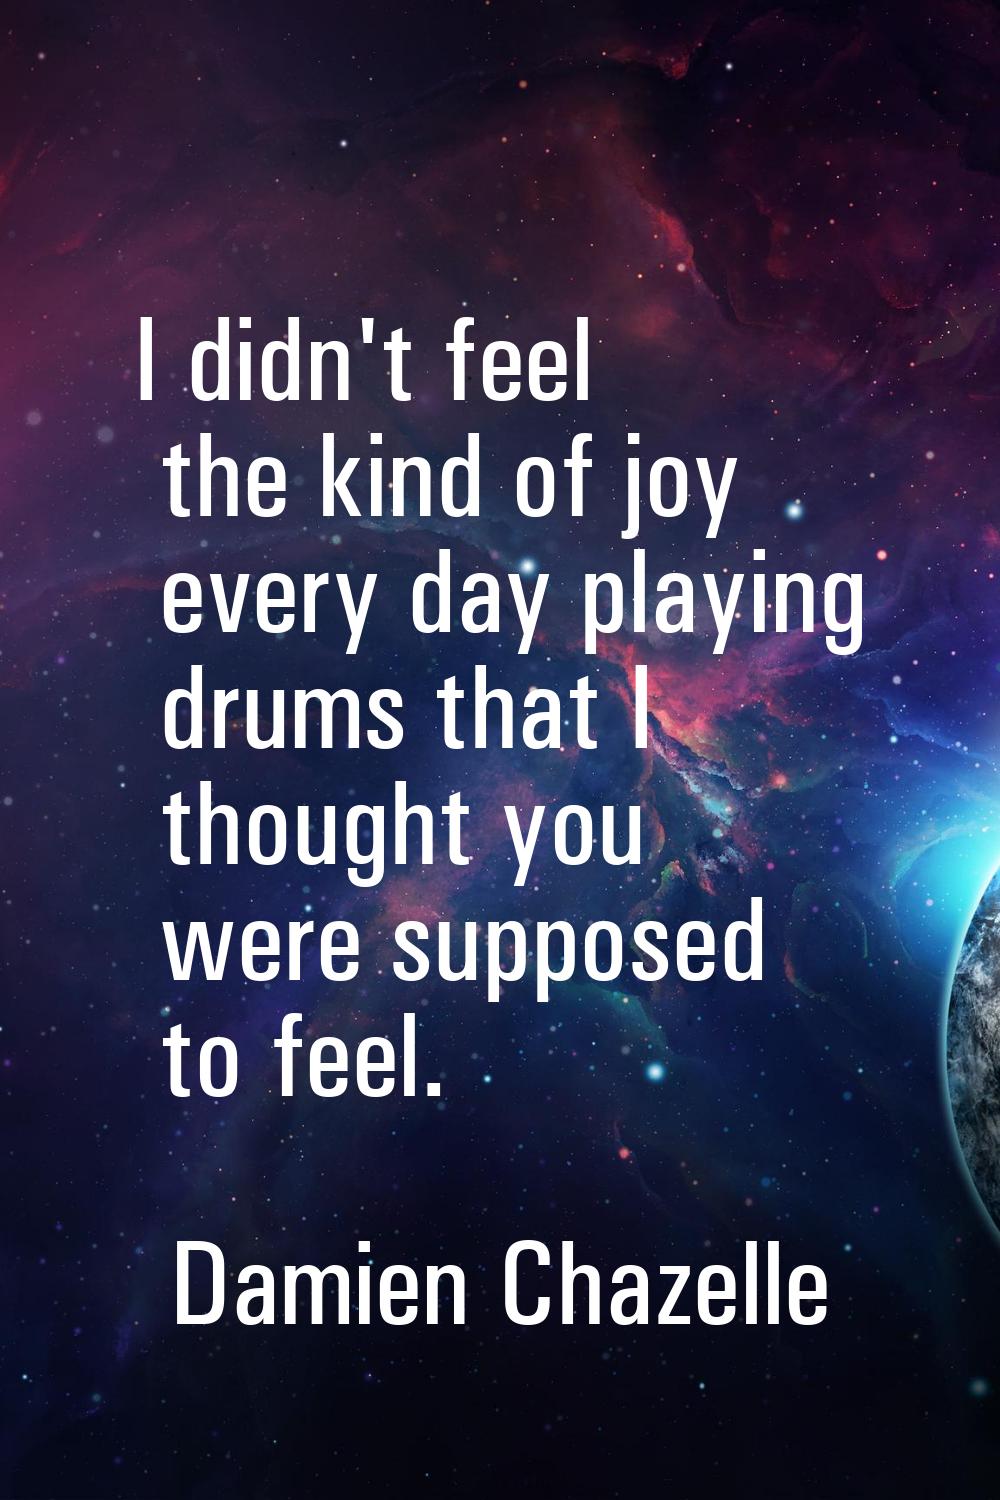 I didn't feel the kind of joy every day playing drums that I thought you were supposed to feel.